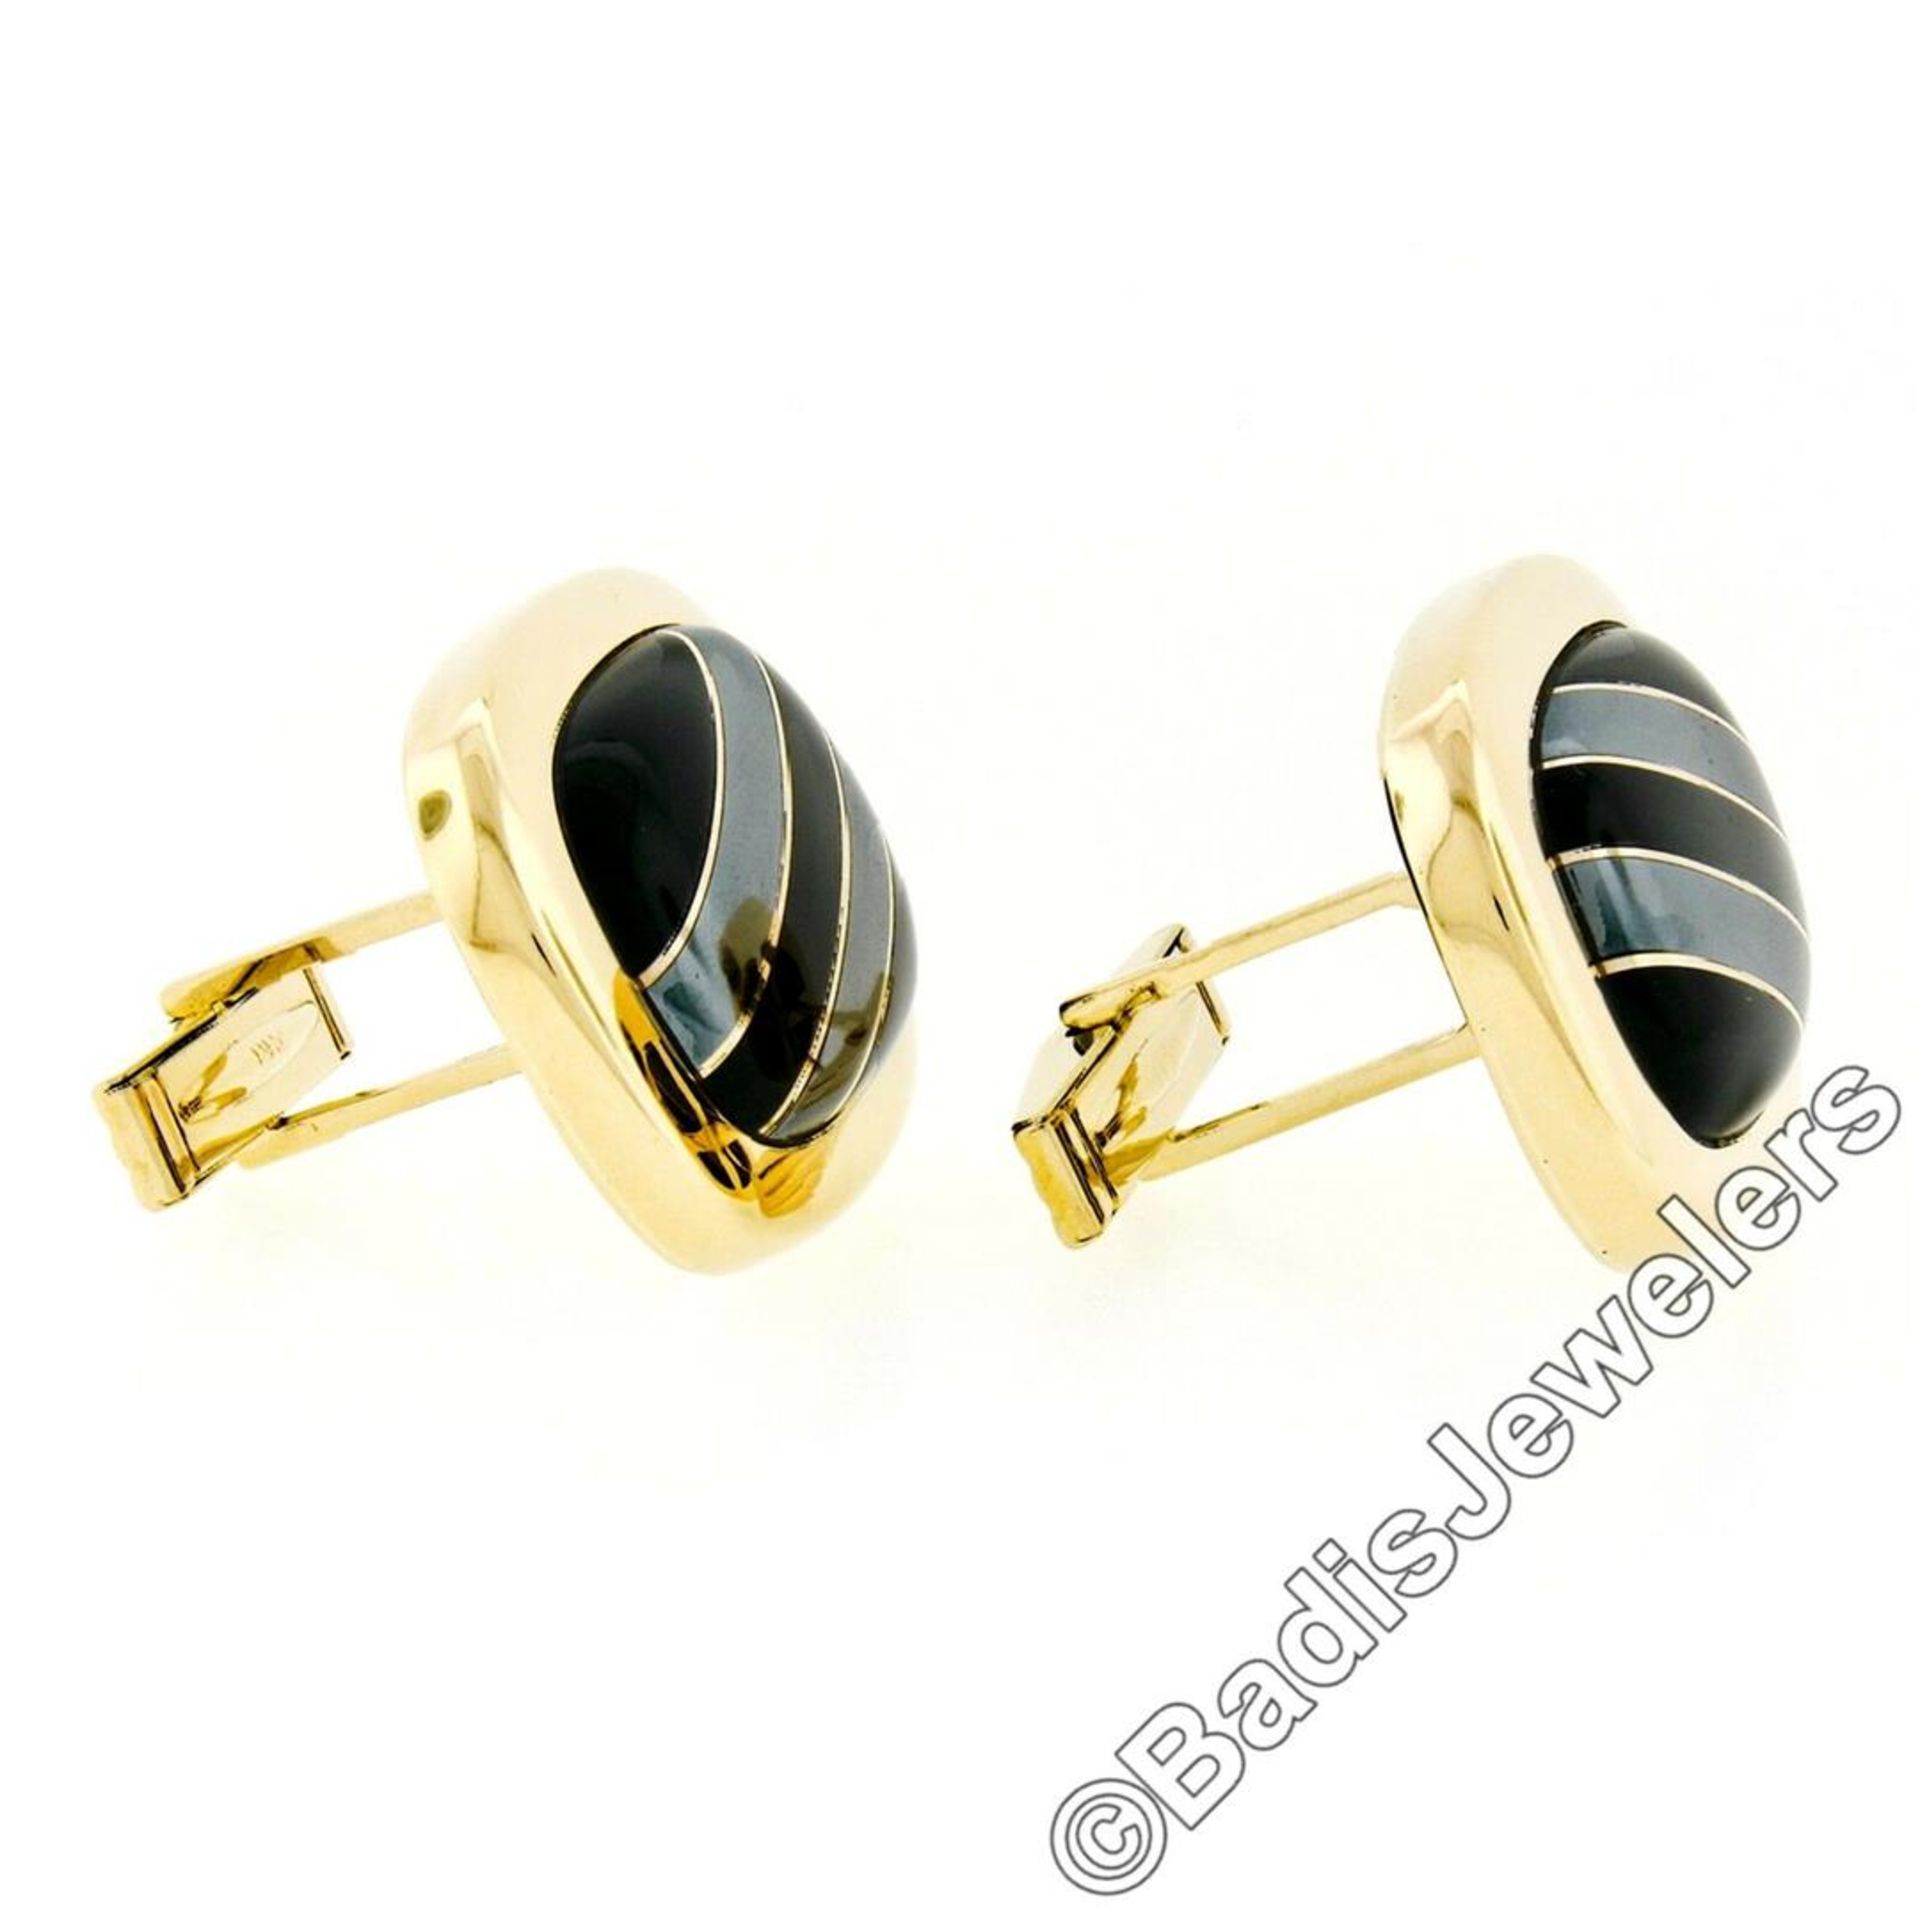 Vintage 14kt Yellow Gold Swivel Cuff Links w/ Hematite Inlaid in Black Onyx - Image 4 of 6